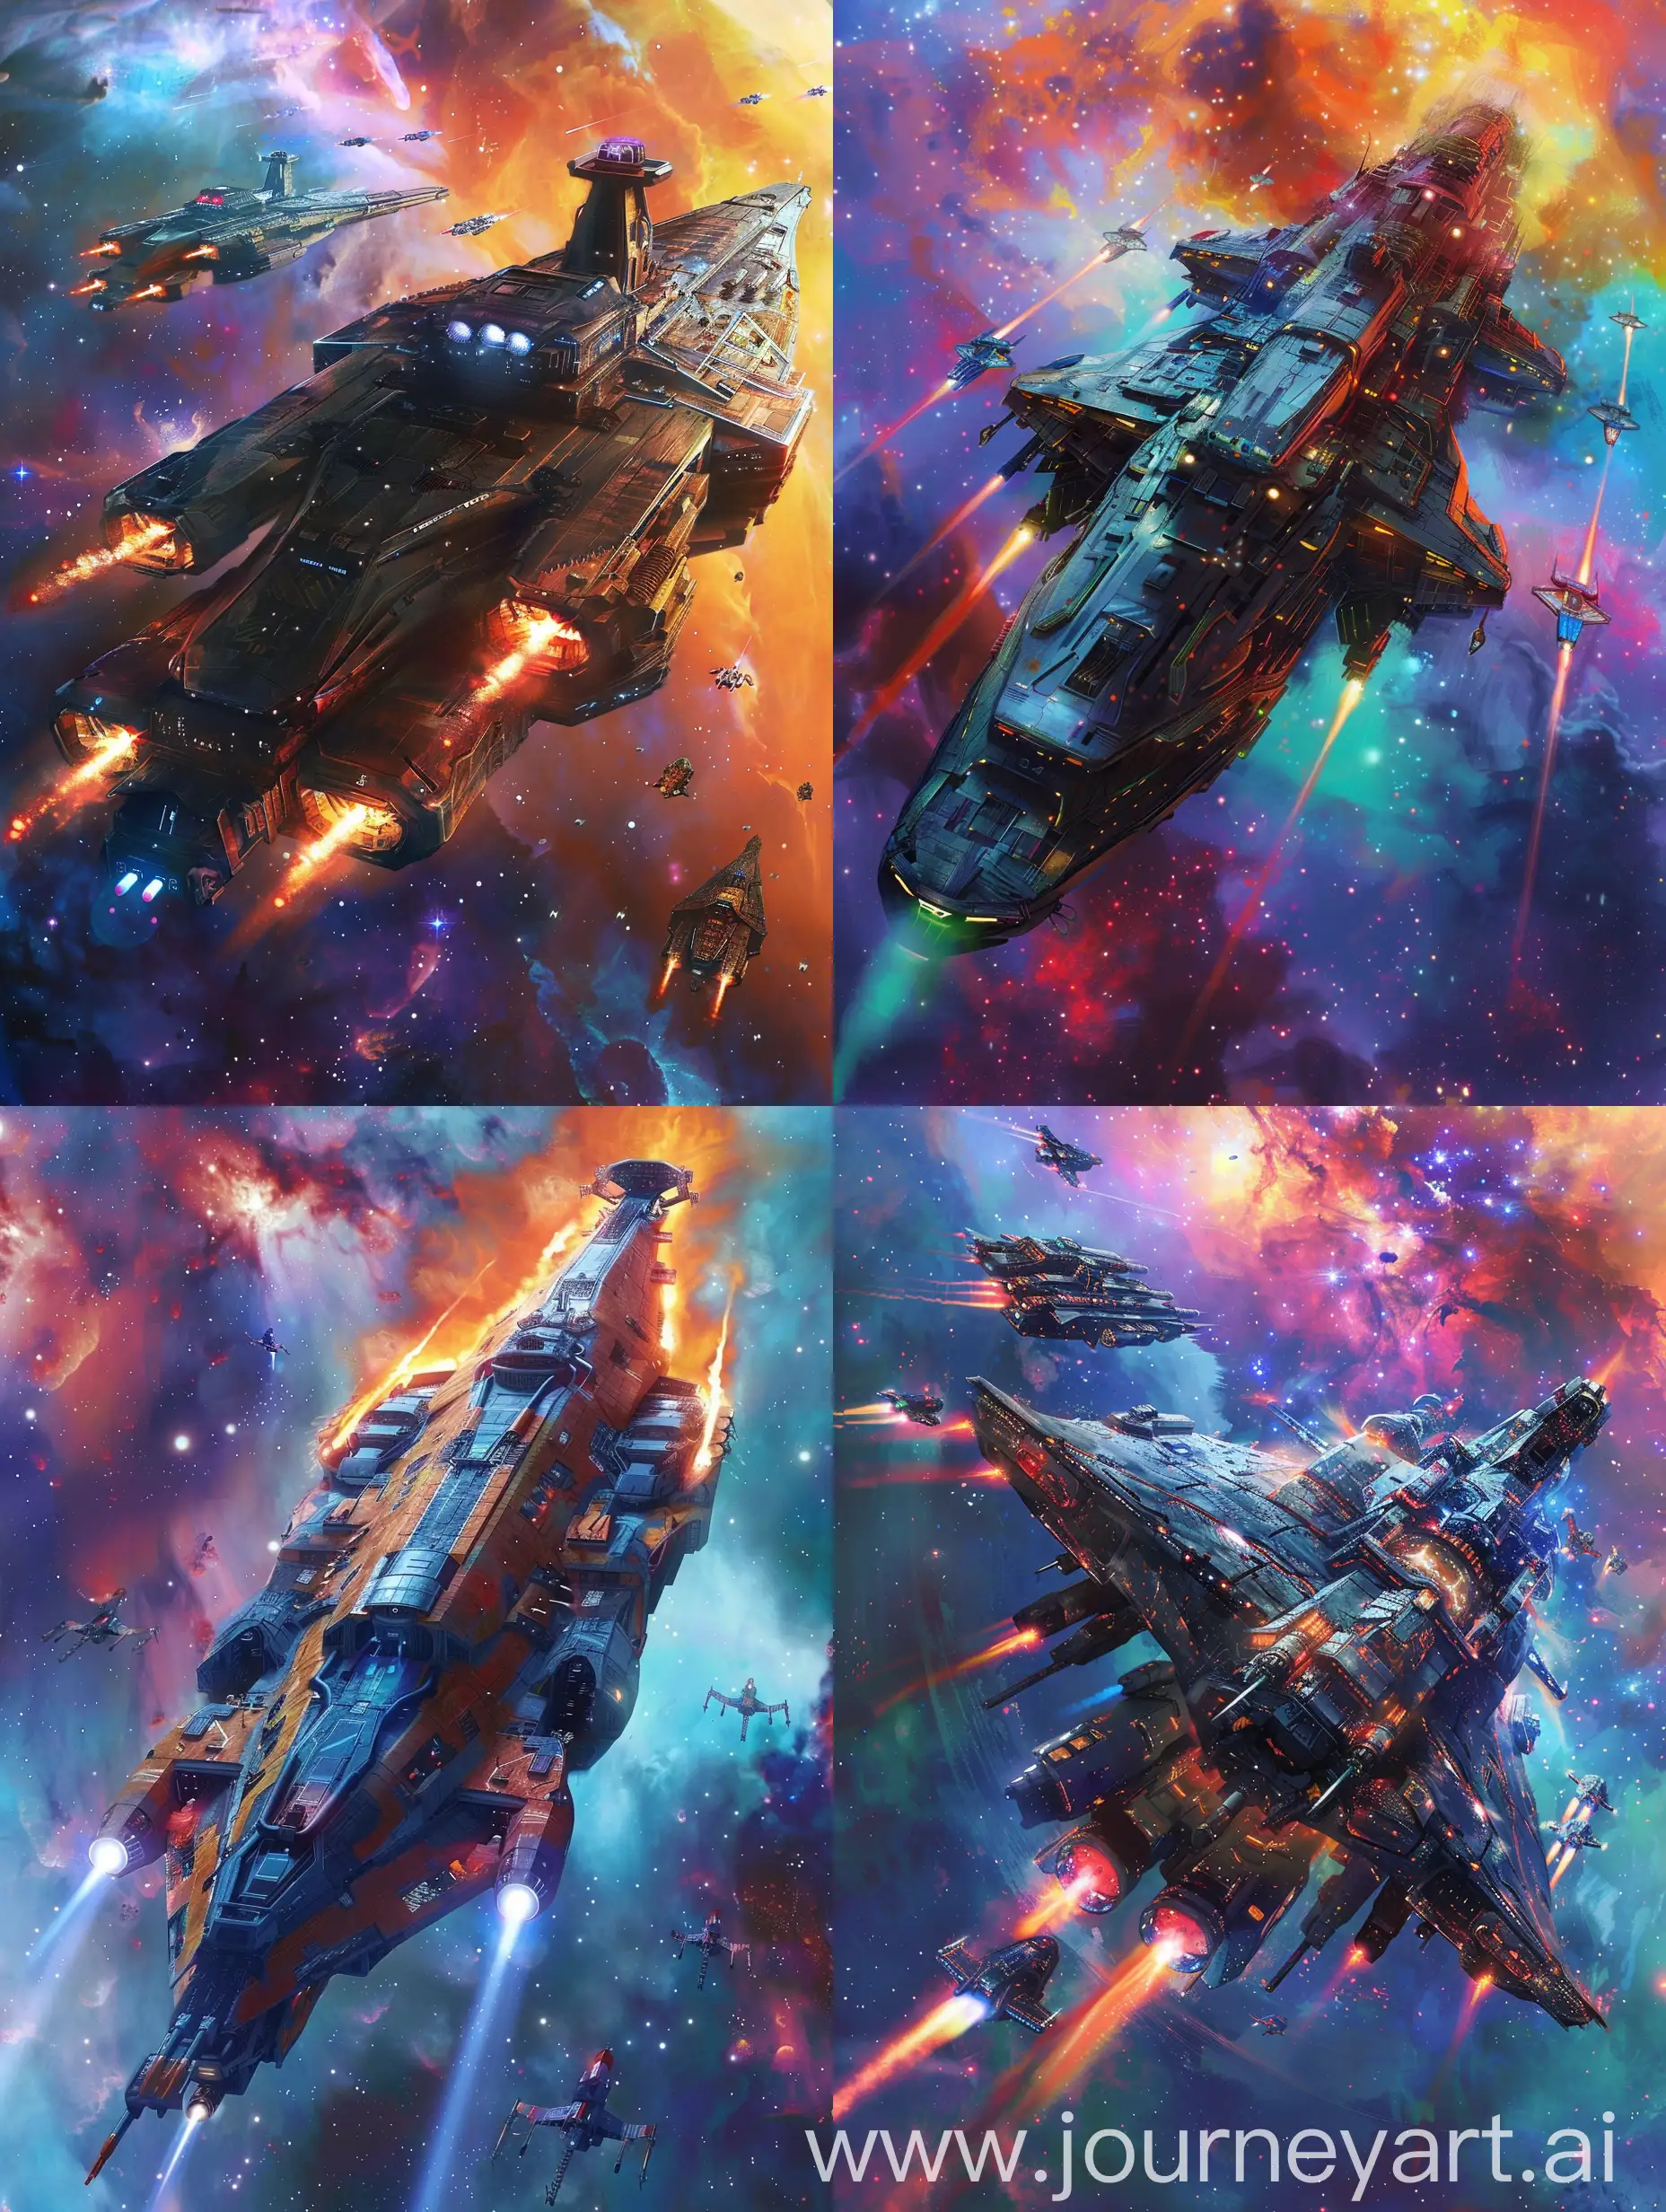 Science fiction, mass effect, starcraft, star wars, eve online, titan, mothership, capital ship, launching starfighters, docking bay, vibrant colors, nebula in background